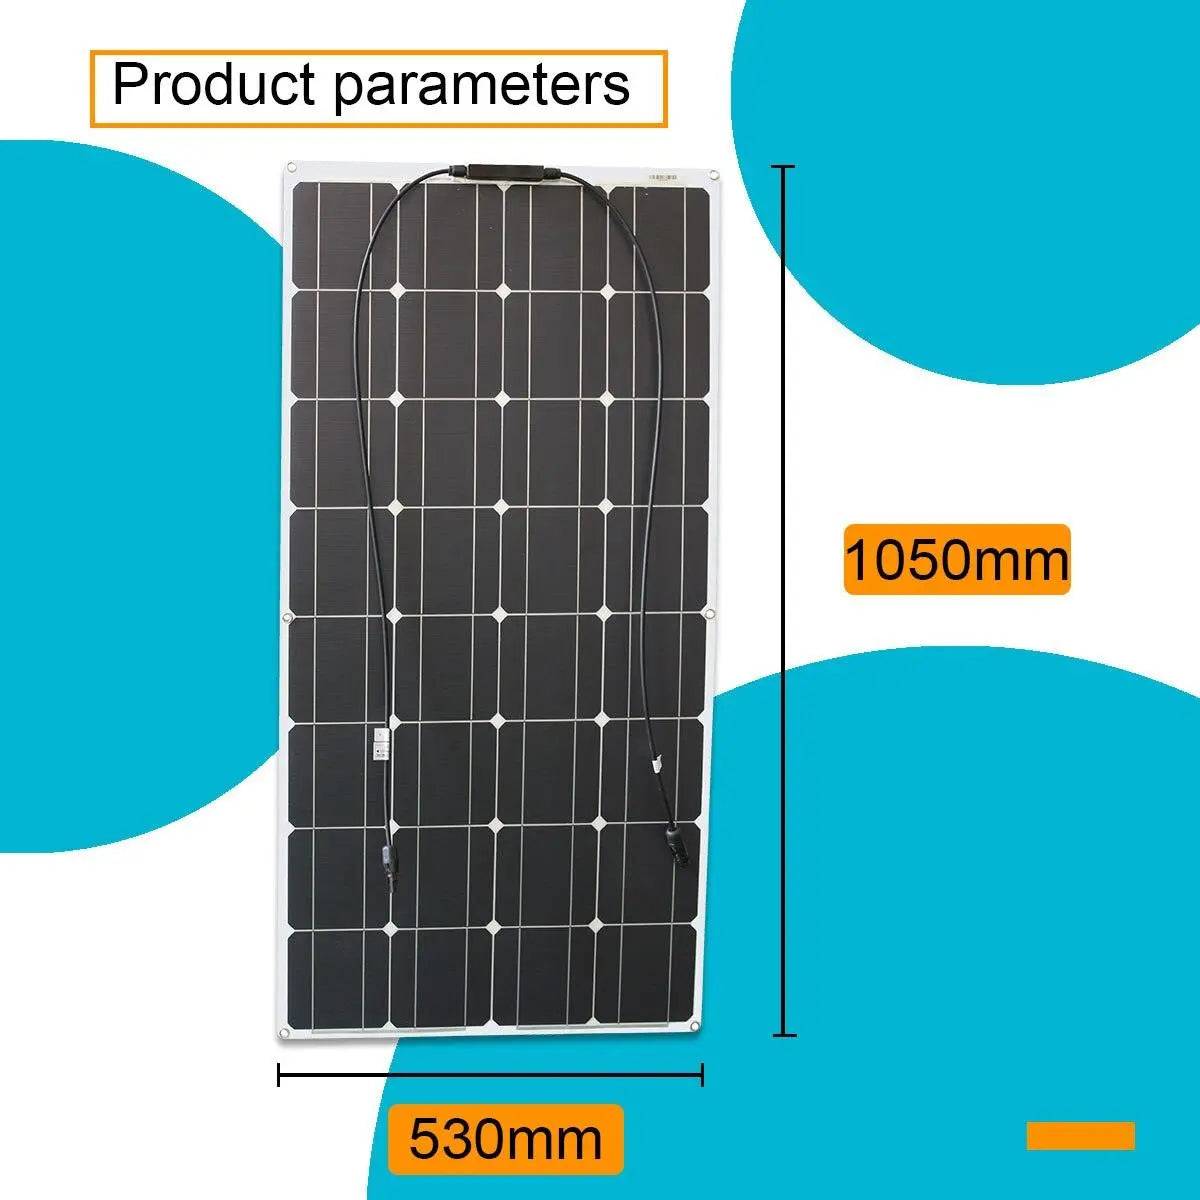 Solar Panel High Efficiency 100w 500w Charger Portable 12v 24v Battery Controller System Flexible Set Camping Power Bank - 54 Energy - Renewable Energy Store